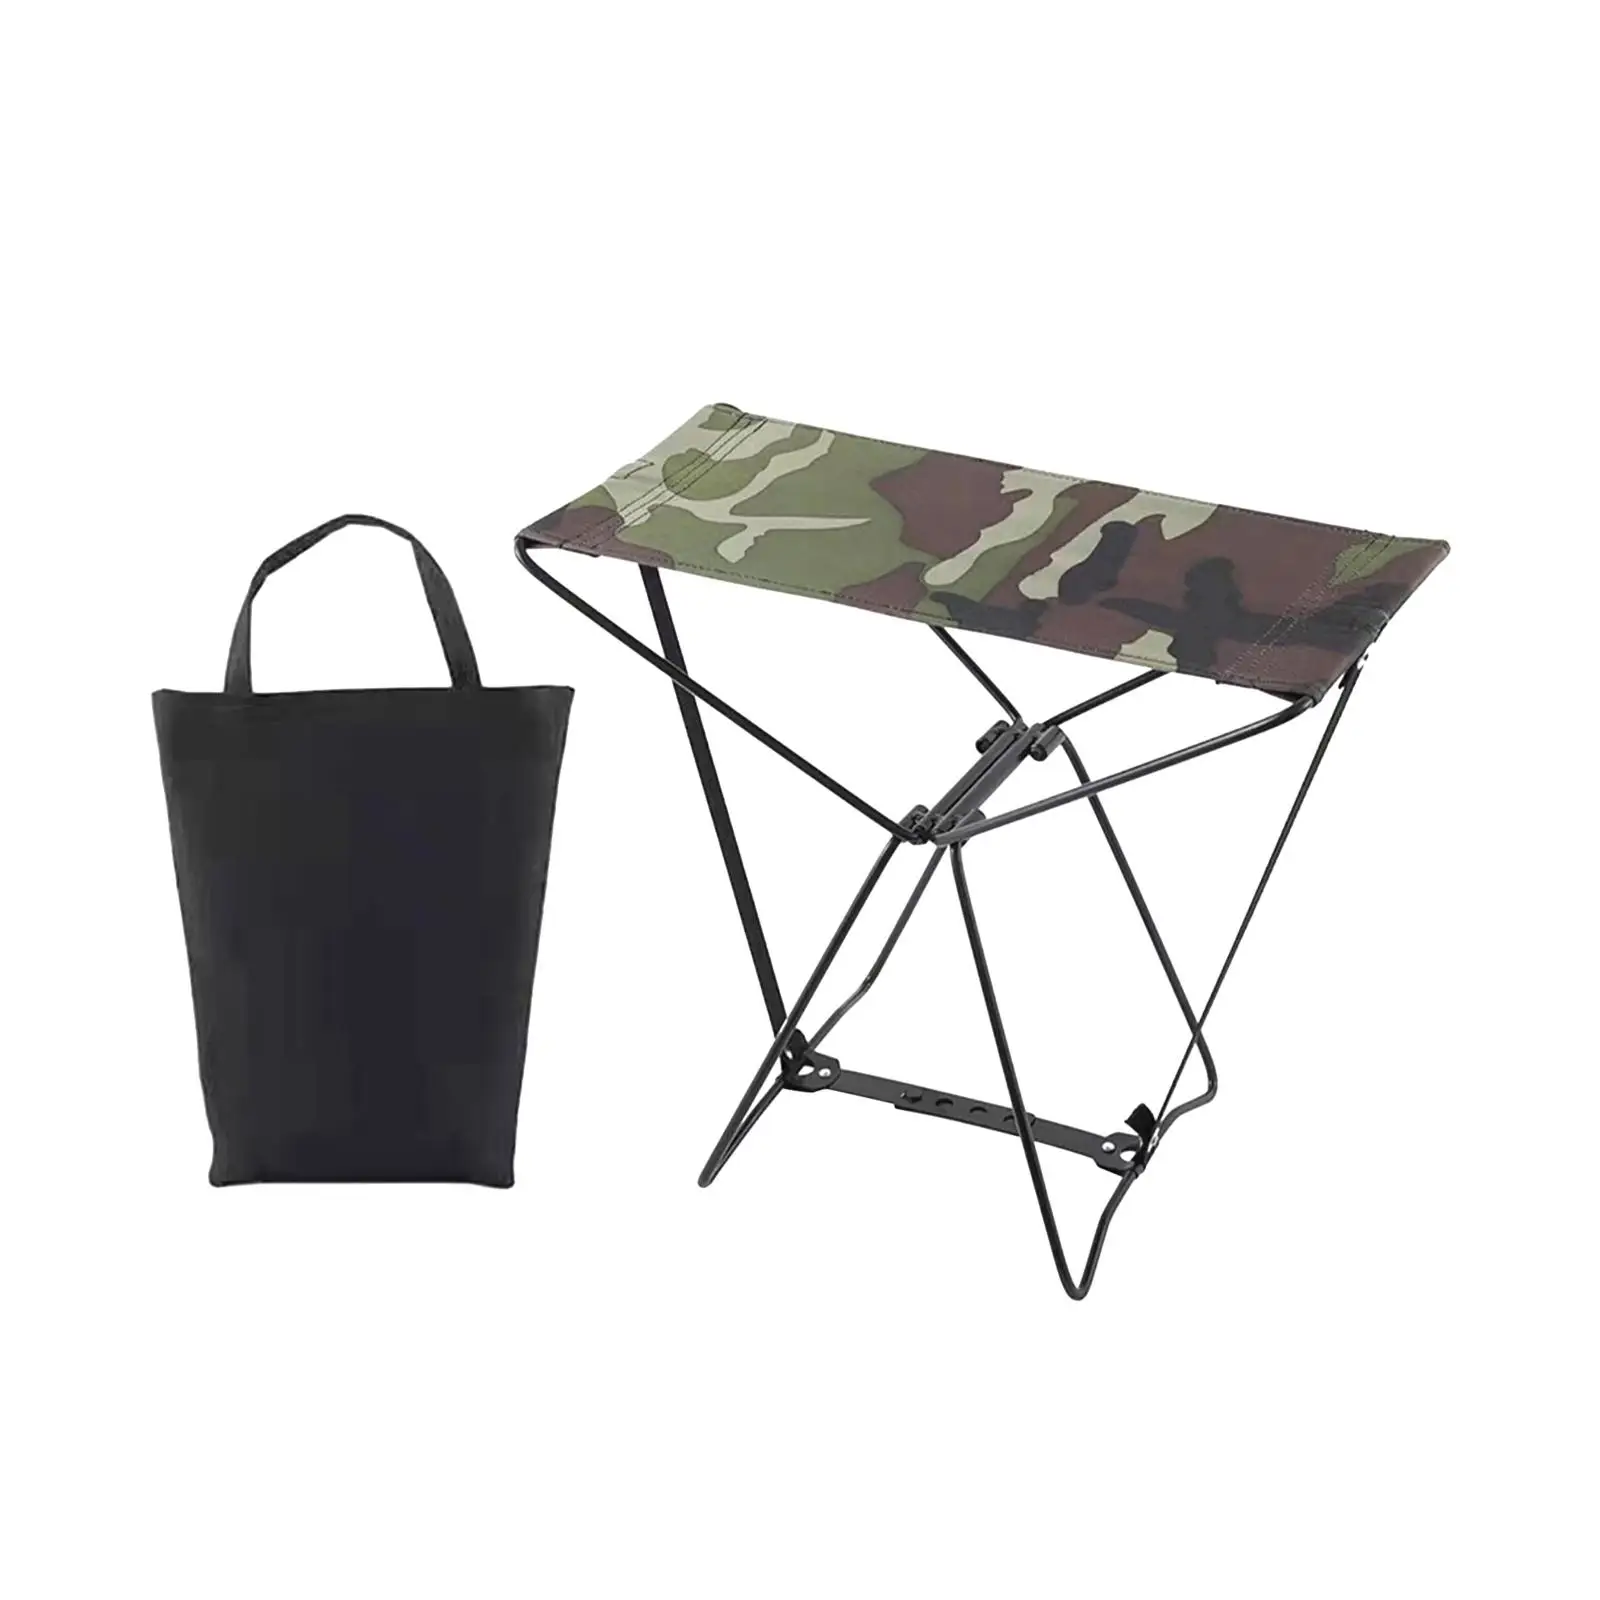 Folding Camping Stool Camp Stool Furniture Compact Outside Camping Chair Collapsible Stool for Backyard Beach Yard Picnic